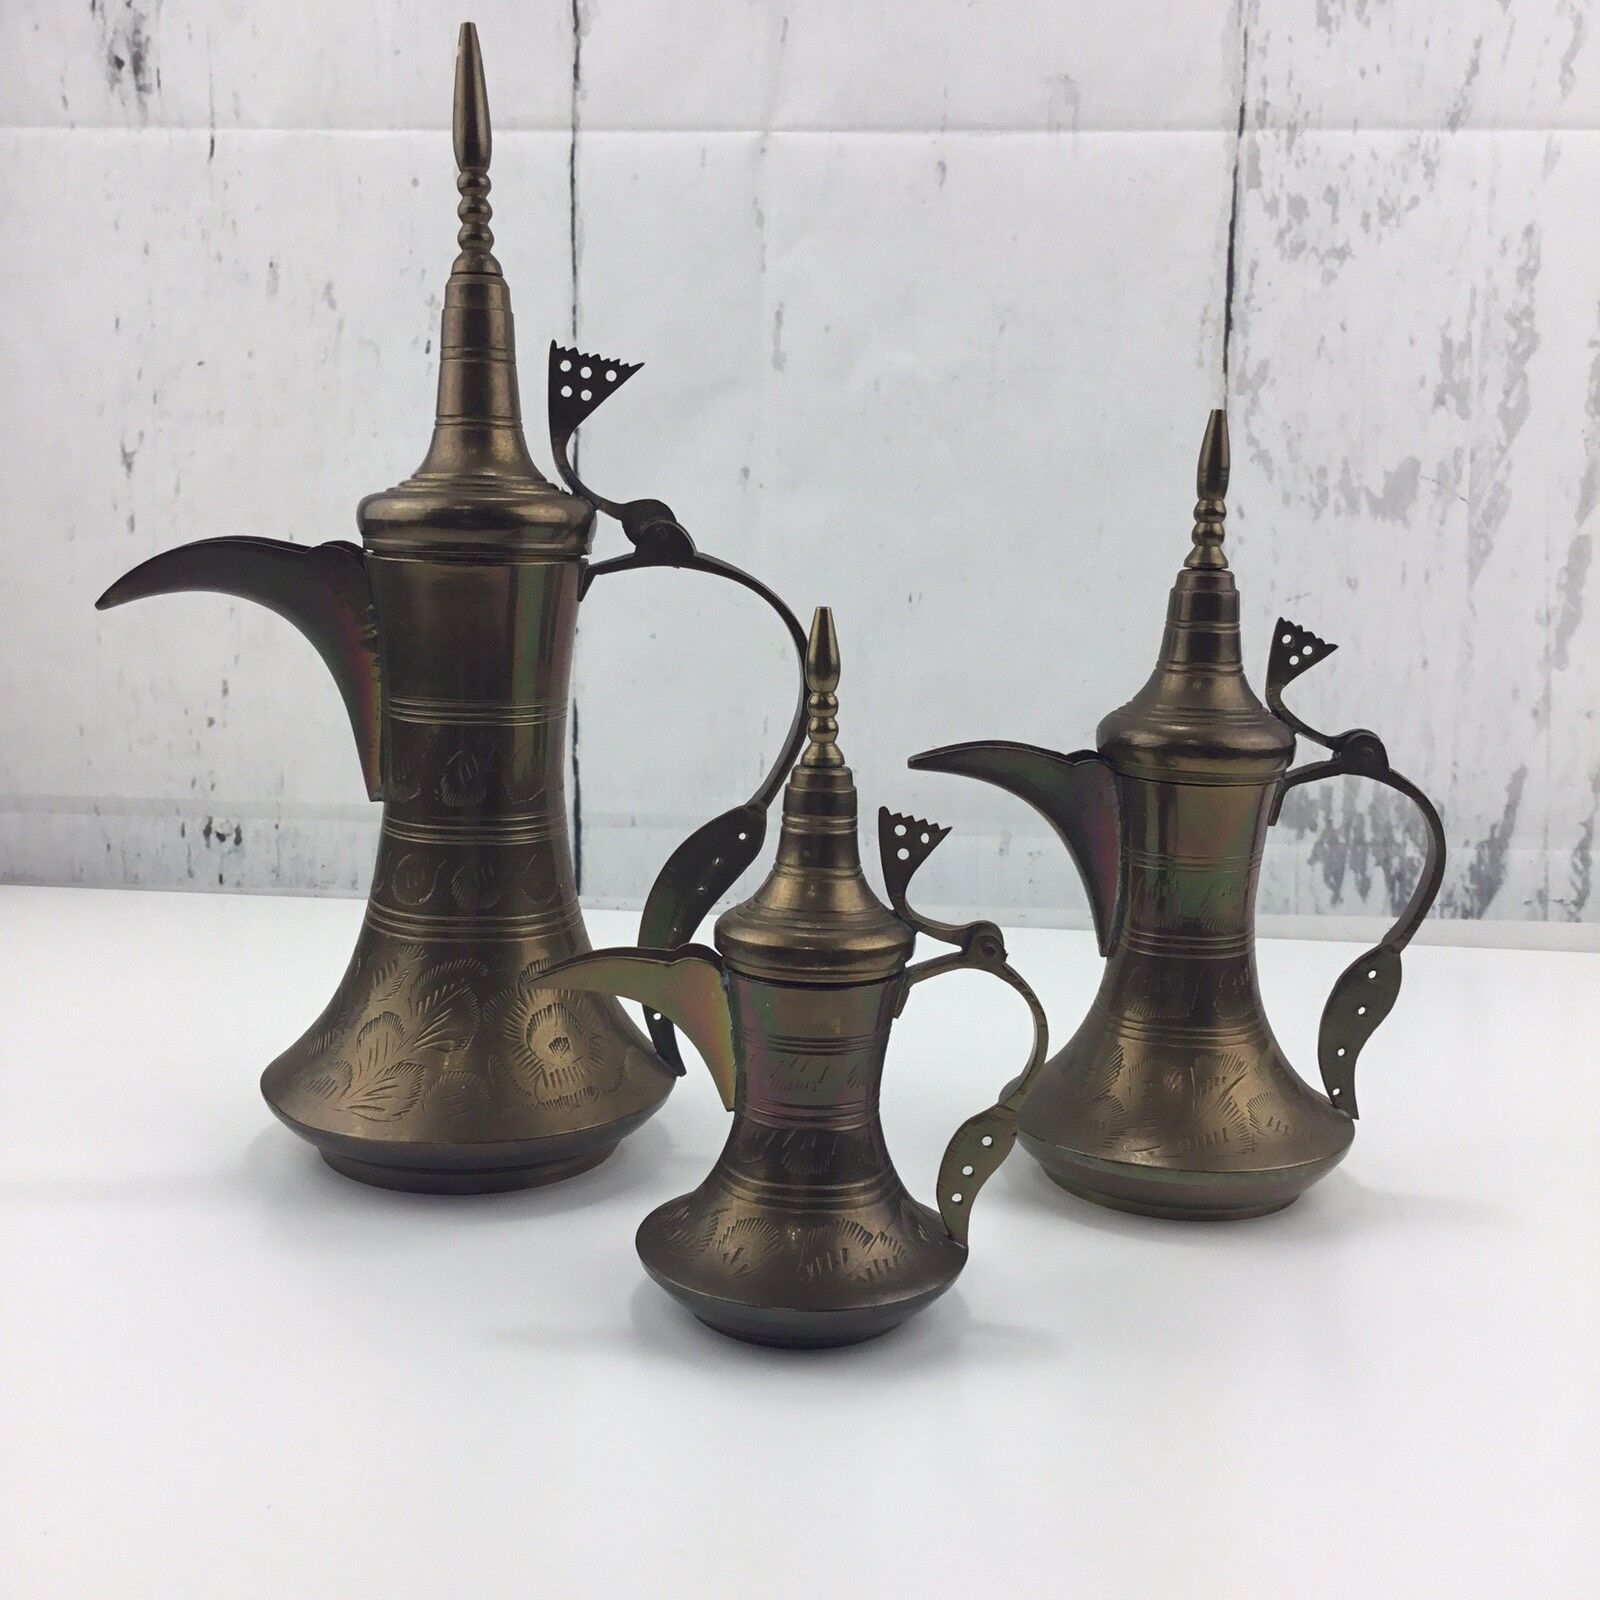 VTG Set 3 Brass Islamic Dallah Arabic Coffee Pots Middle Eastern India Signed 